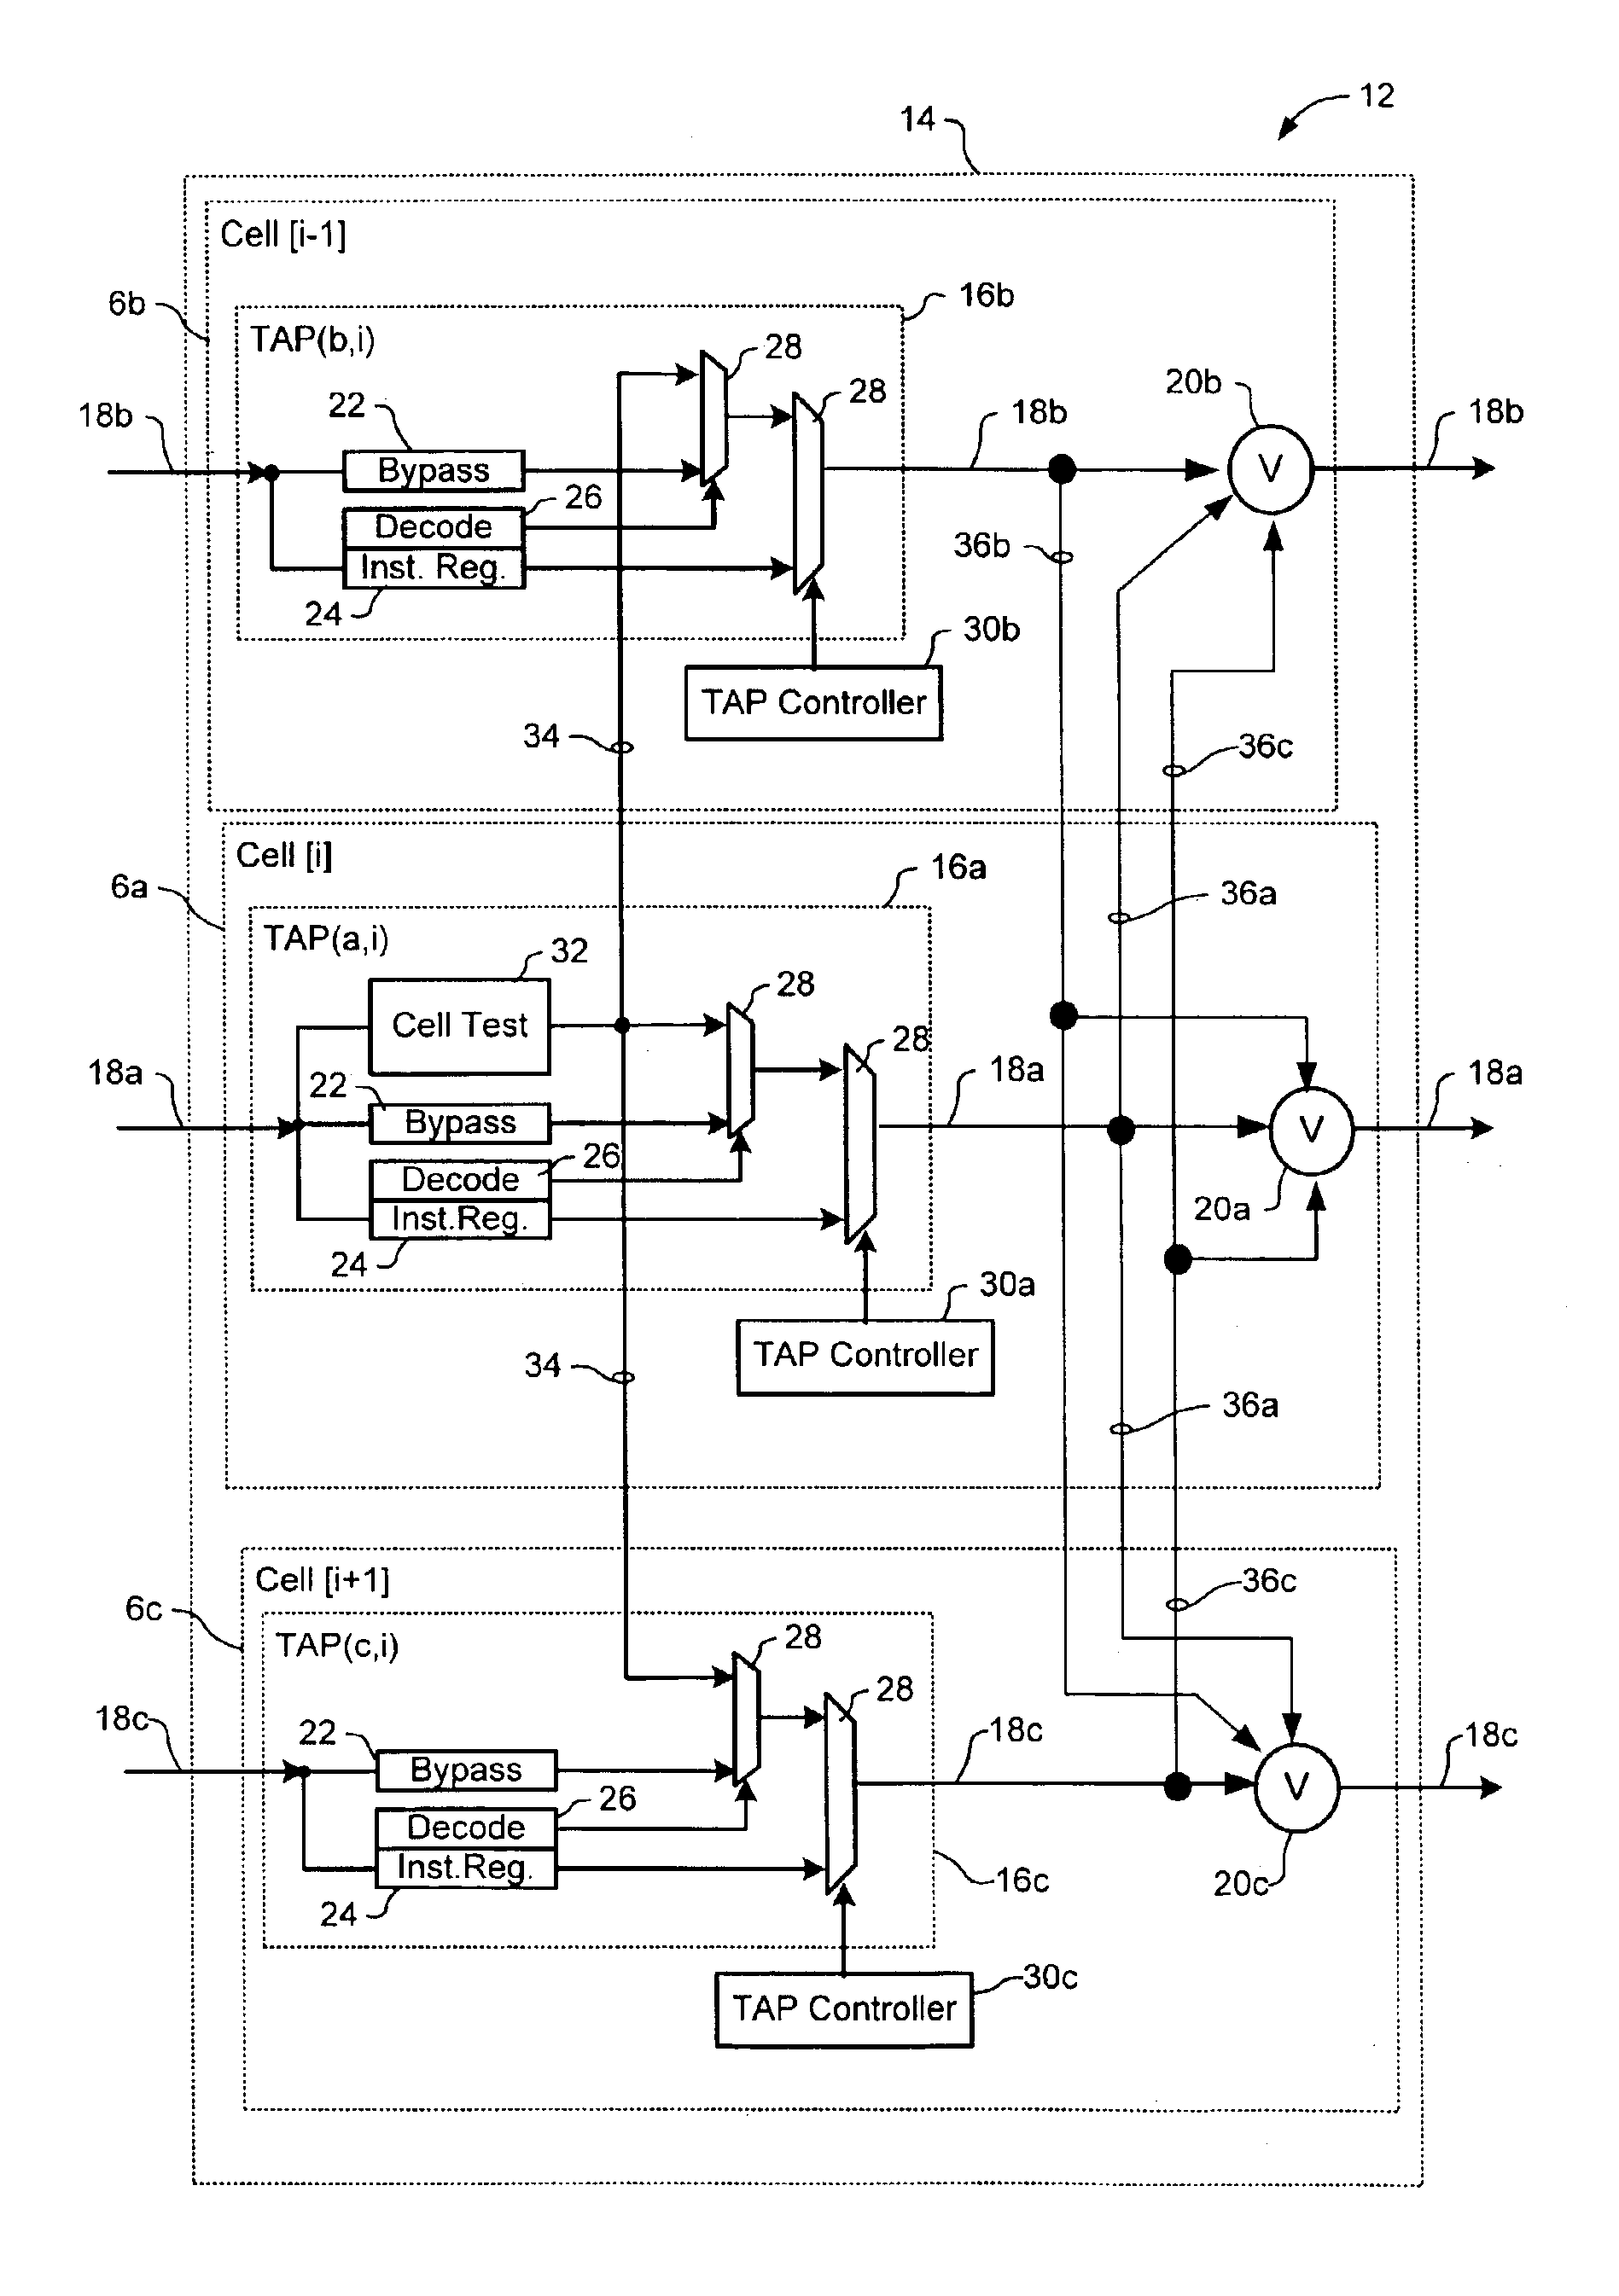 Fault tolerant scan chain for a parallel processing system